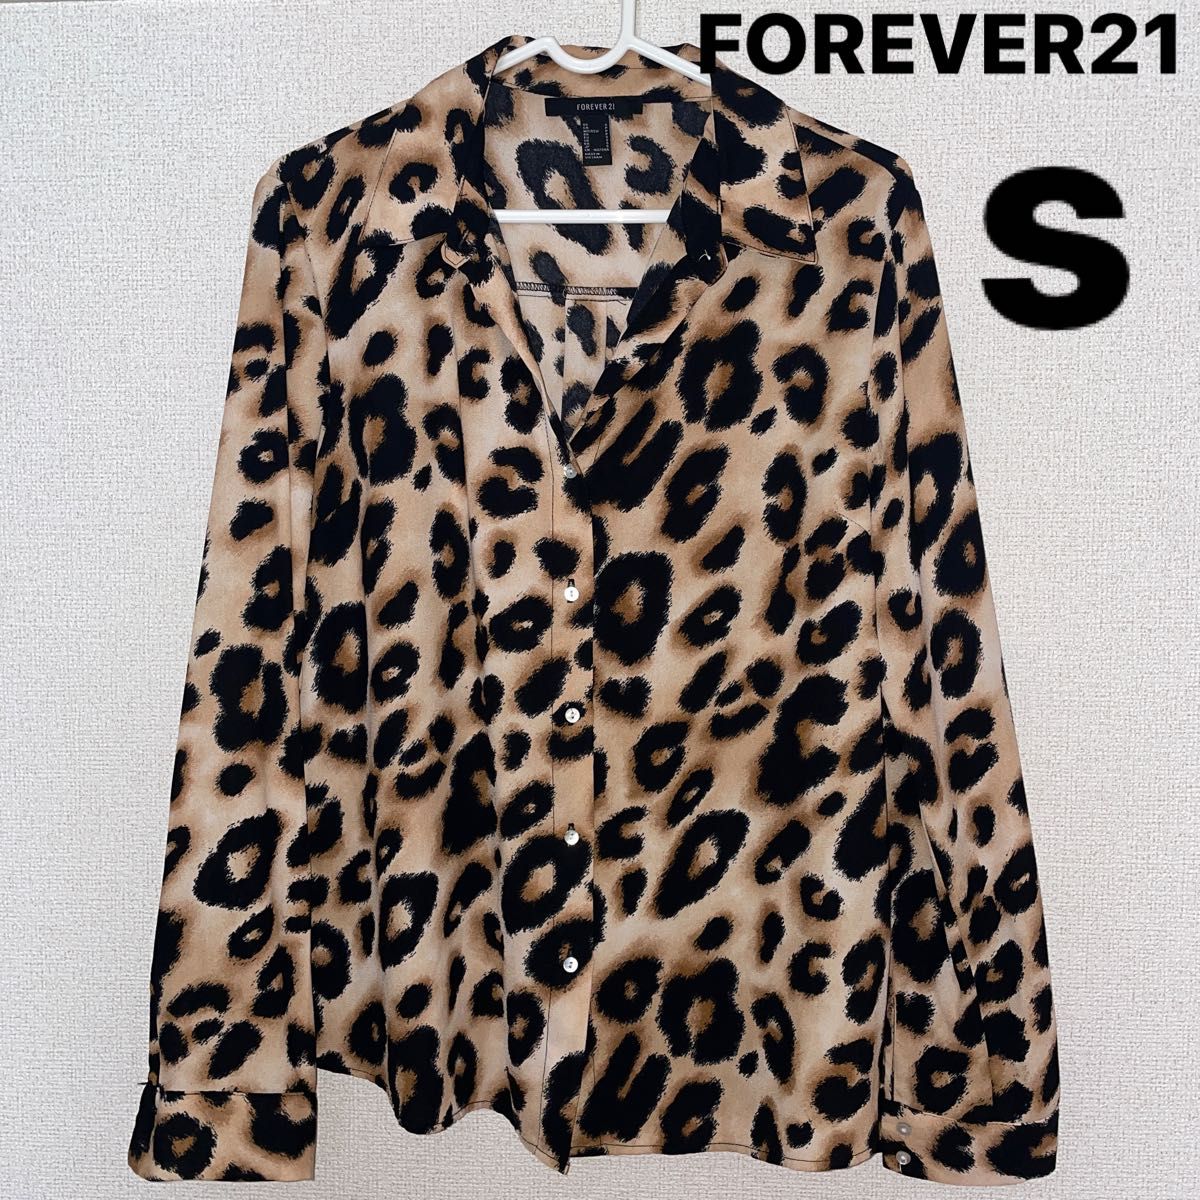 Forever21 シャツ ブラウス 長袖 総柄 レオパード